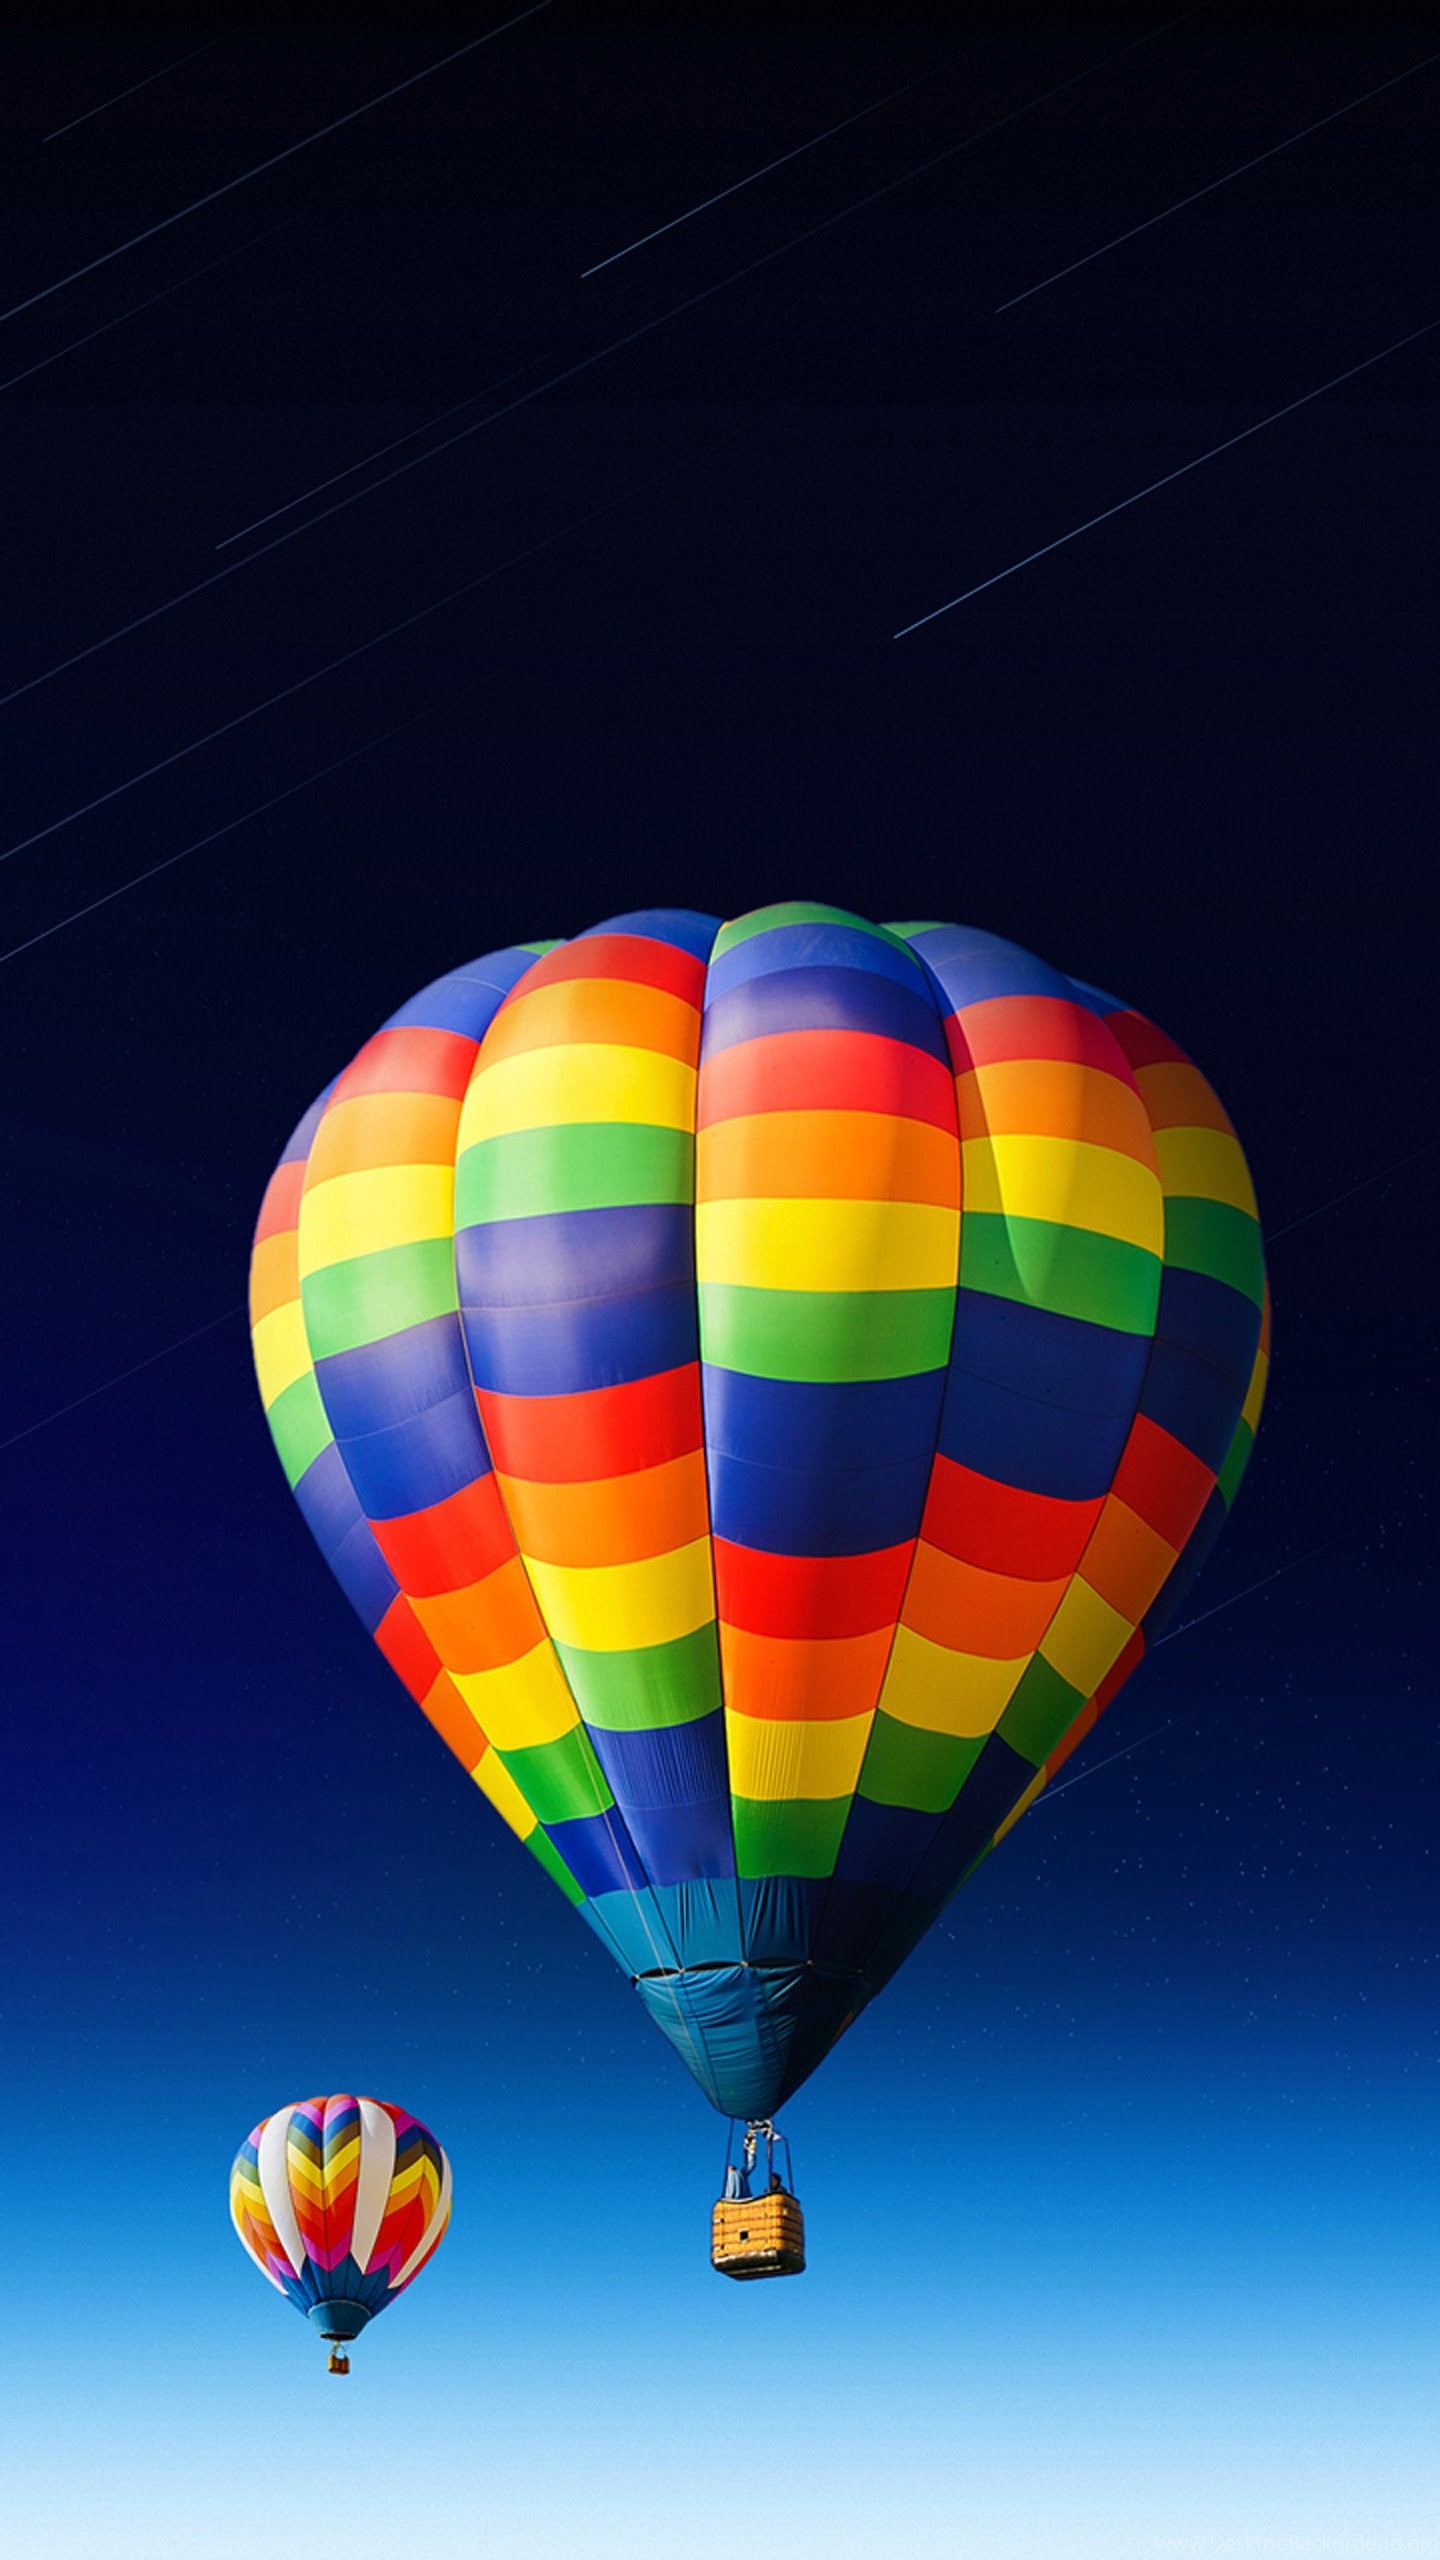 1440x2560 Nice Colored Hot air Balloon Wallpapers For Galaxy S6.jpg Desktop Background